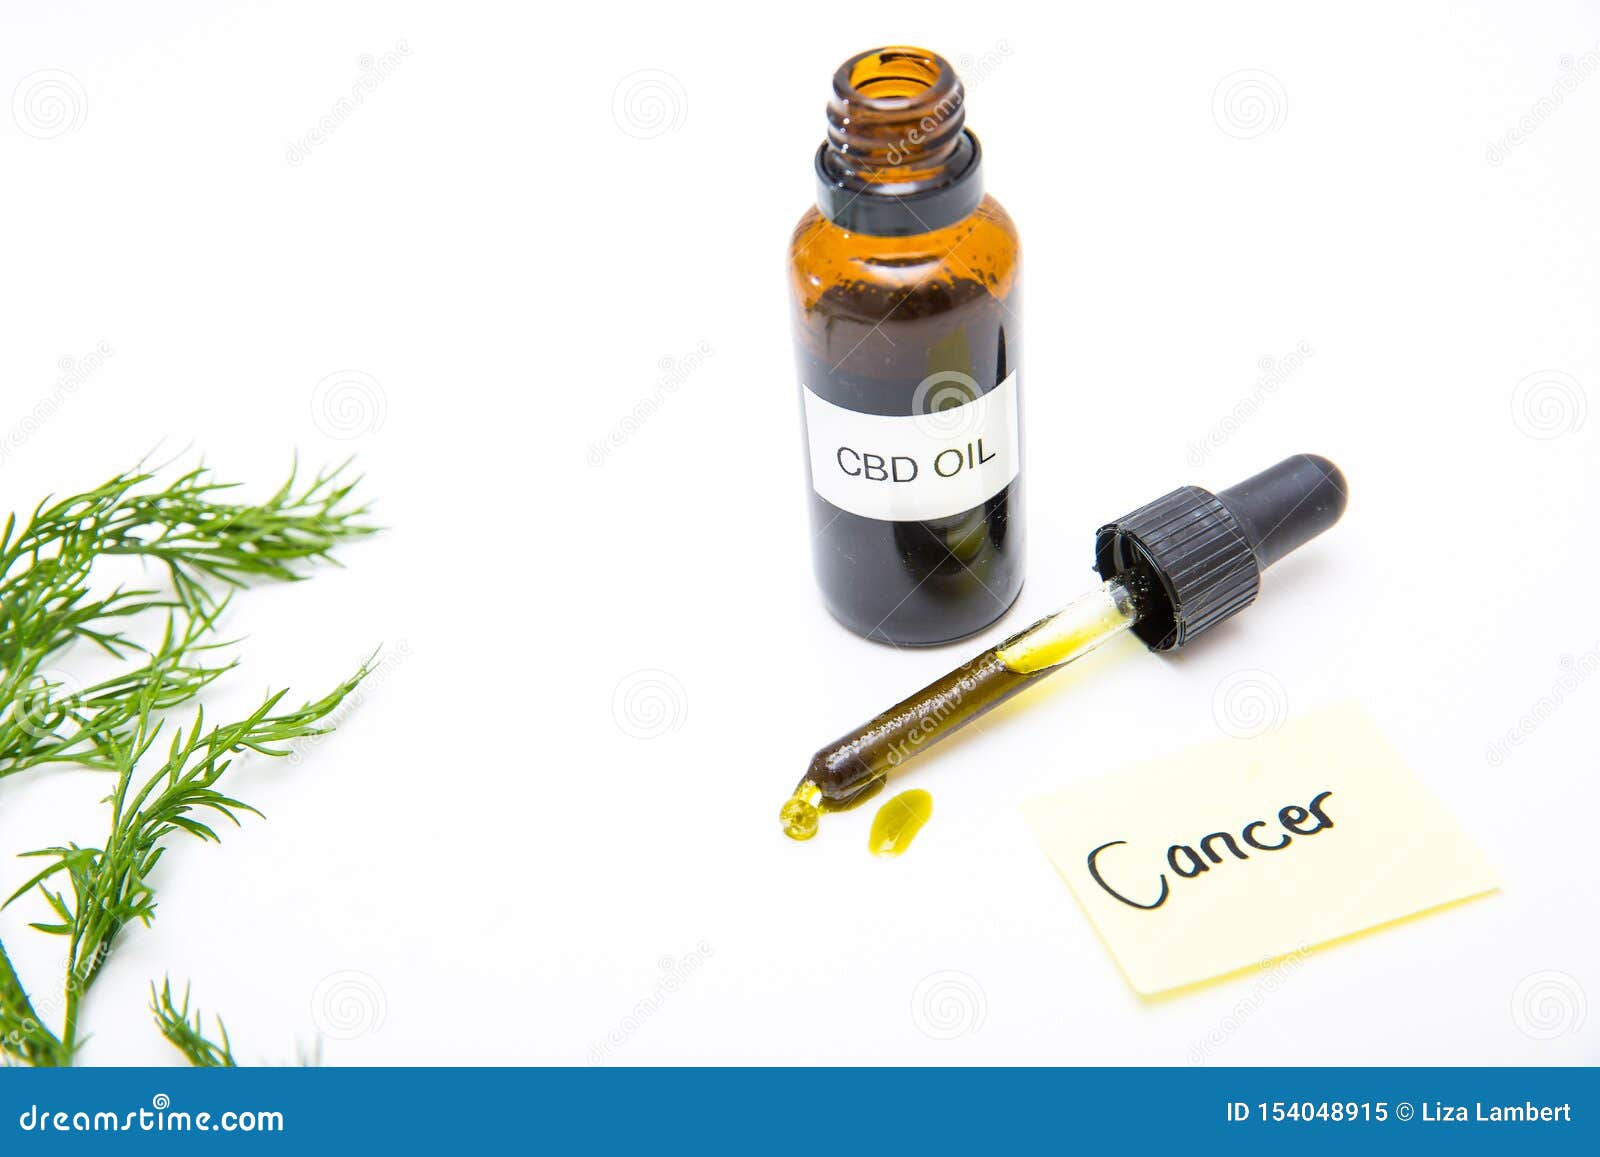 MIX YOUR OWN CBC OIL - Cbd|Oil|Benefits|Cbc|Effects|Pain|Study|Health|Thc|Products|Cannabinoids|Studies|Research|Anxiety|Cannabis|Symptoms|Evidence|People|System|Disease|Treatment|Inflammation|Hemp|Body|Receptors|Disorders|Brain|Plant|Cells|Side|Effect|Blood|Patients|Cancer|Product|Skin|Marijuana|Properties|Cannabidiol|Cannabinoid|Cbd Oil|Cbd Products|Cbc Oil|Side Effects|Endocannabinoid System|Chronic Pain|Multiple Sclerosis|Pain Relief|Cannabis Plant|Cbd Oil Benefits|Blood Pressure|Health Benefits|High Blood Pressure|Anti-Inflammatory Properties|Neuropathic Pain|Animal Studies|Hemp Plant|Hemp Oil|Anxiety Disorders|Cbd Product|Immune System|Clinical Trials|Cbd Gummies|Nerve Cells|Nervous System|Entourage Effect|Hemp Seed Oil|United States|Cbd Oils|Drug Administration